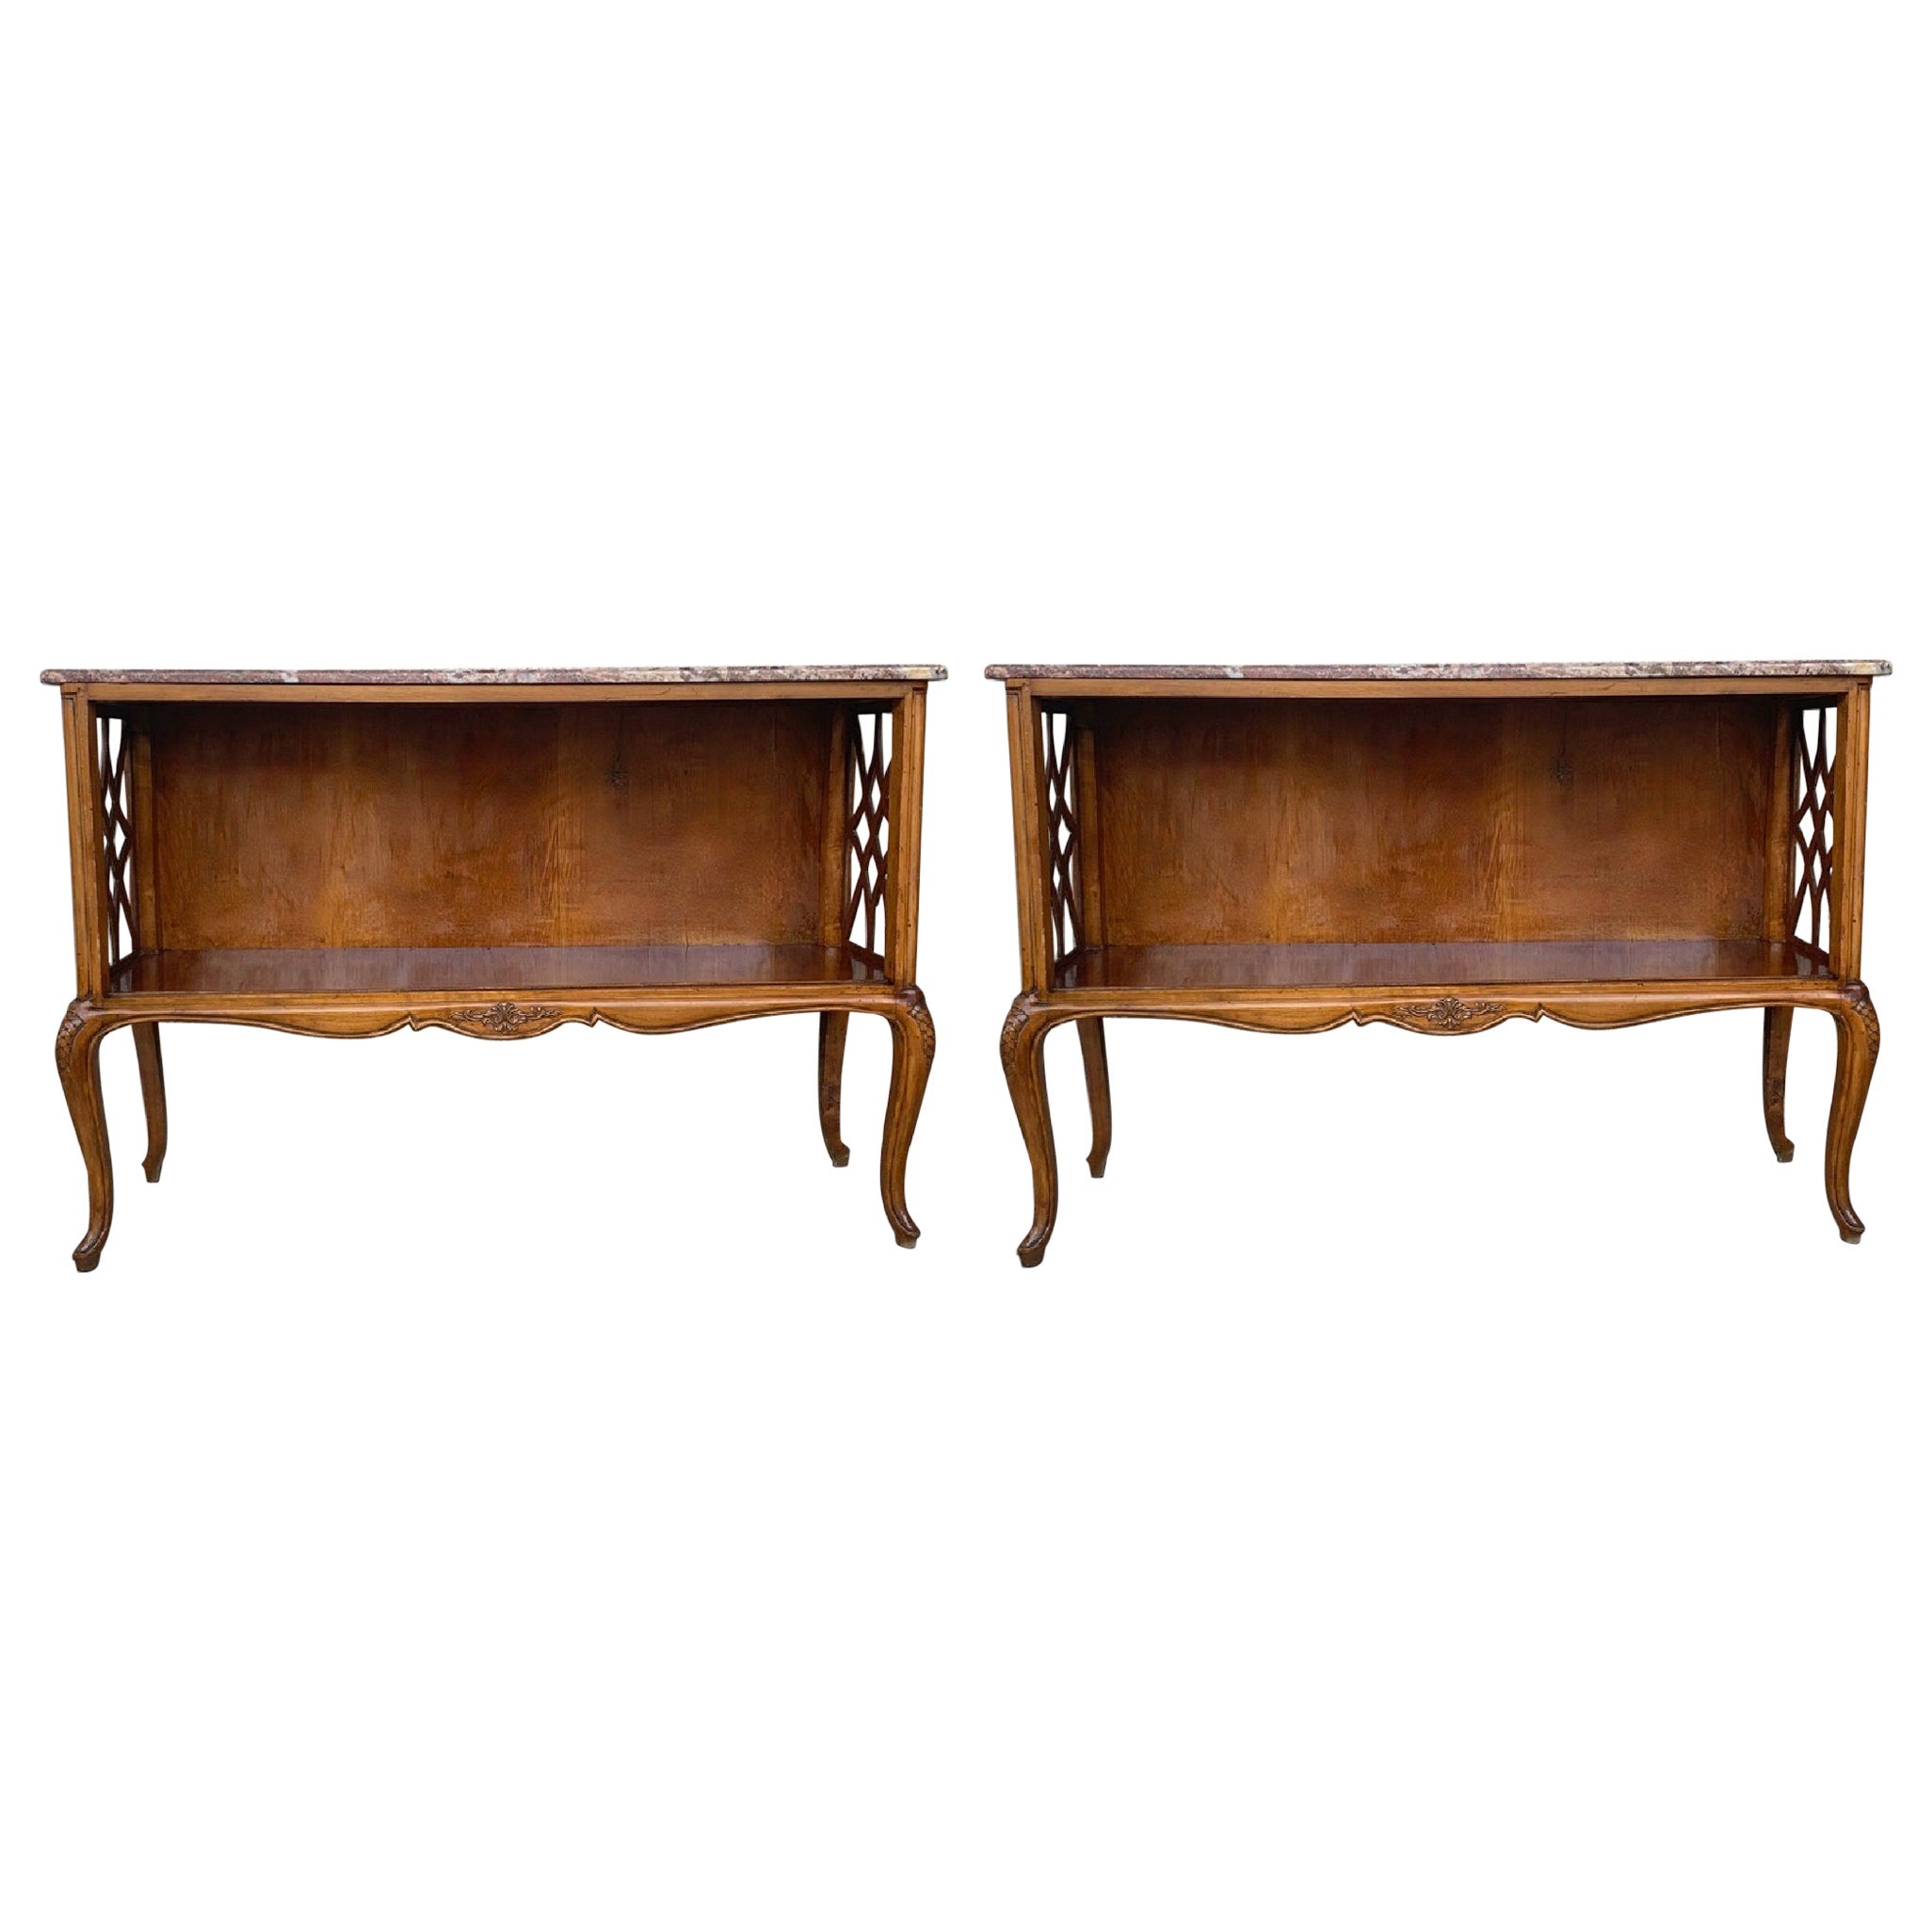 Pair of French Server Sideboard Table Carved Oak Panels with open Shelve